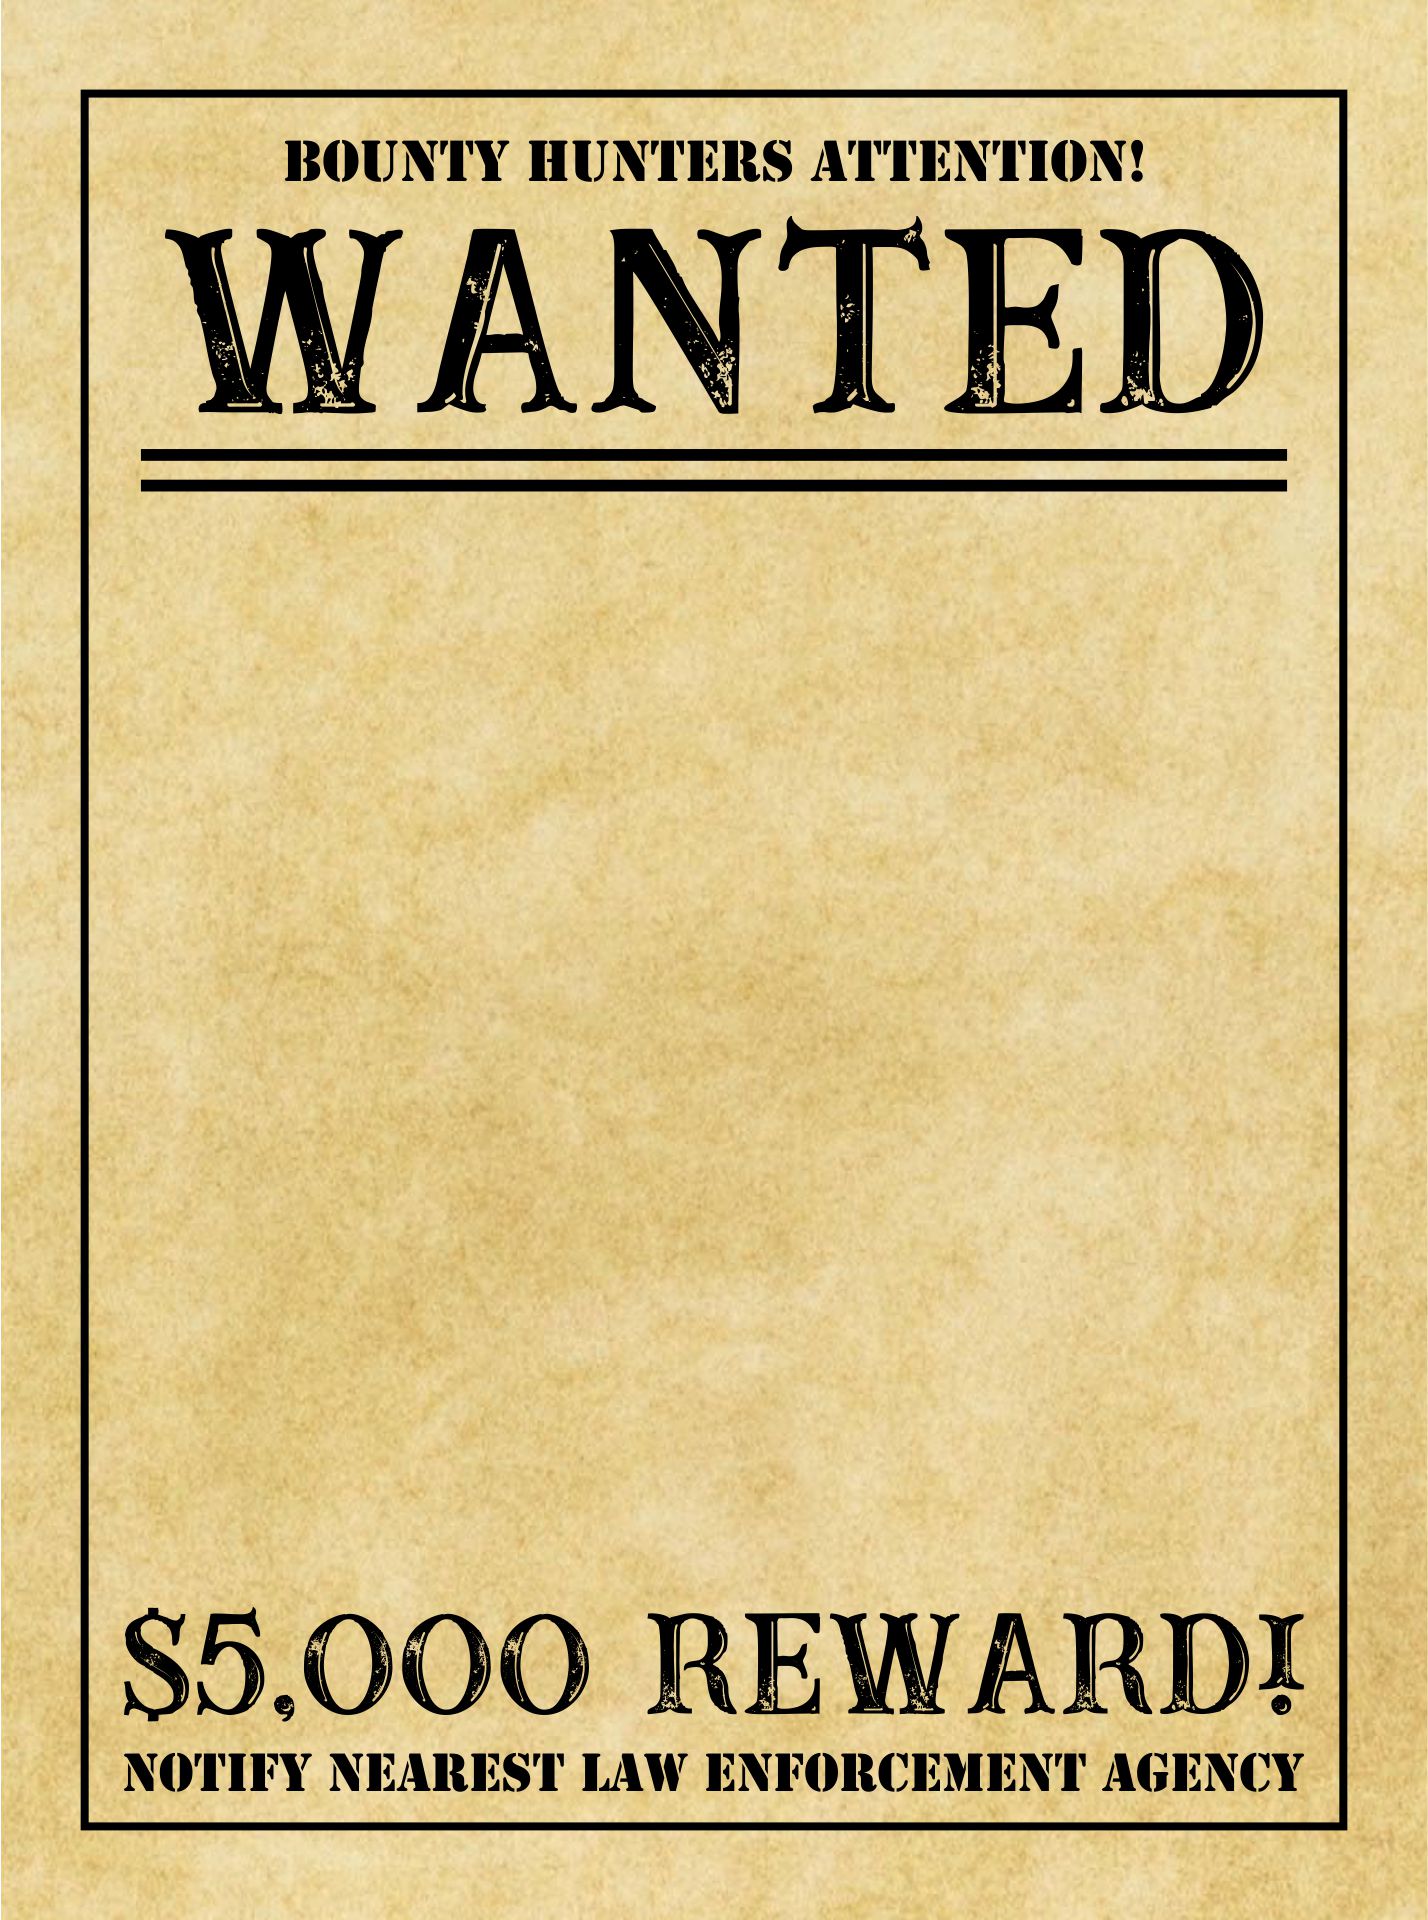 Western Wanted Poster Template